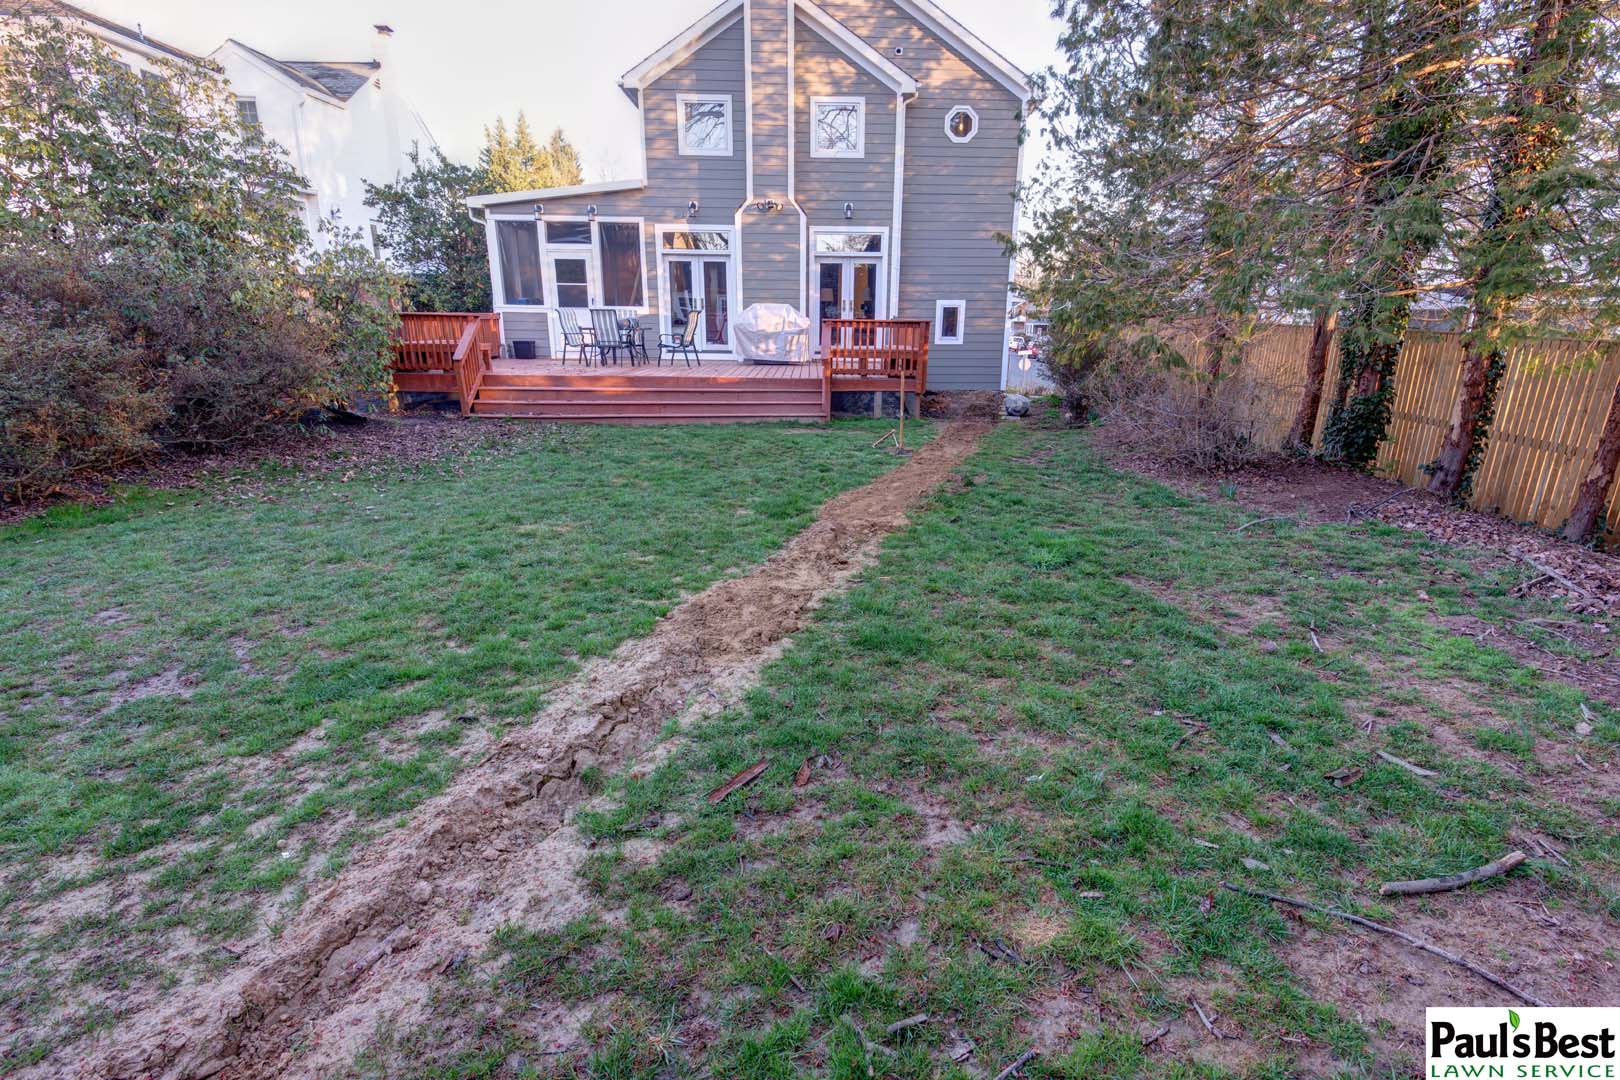 https://paulsbestlawn.com/pbls-img/portfolio/other-services/before-and-after/web-ready/large/BAOS1-d-After-Sod-and-Mulching-in-Arlington-VA.jpg